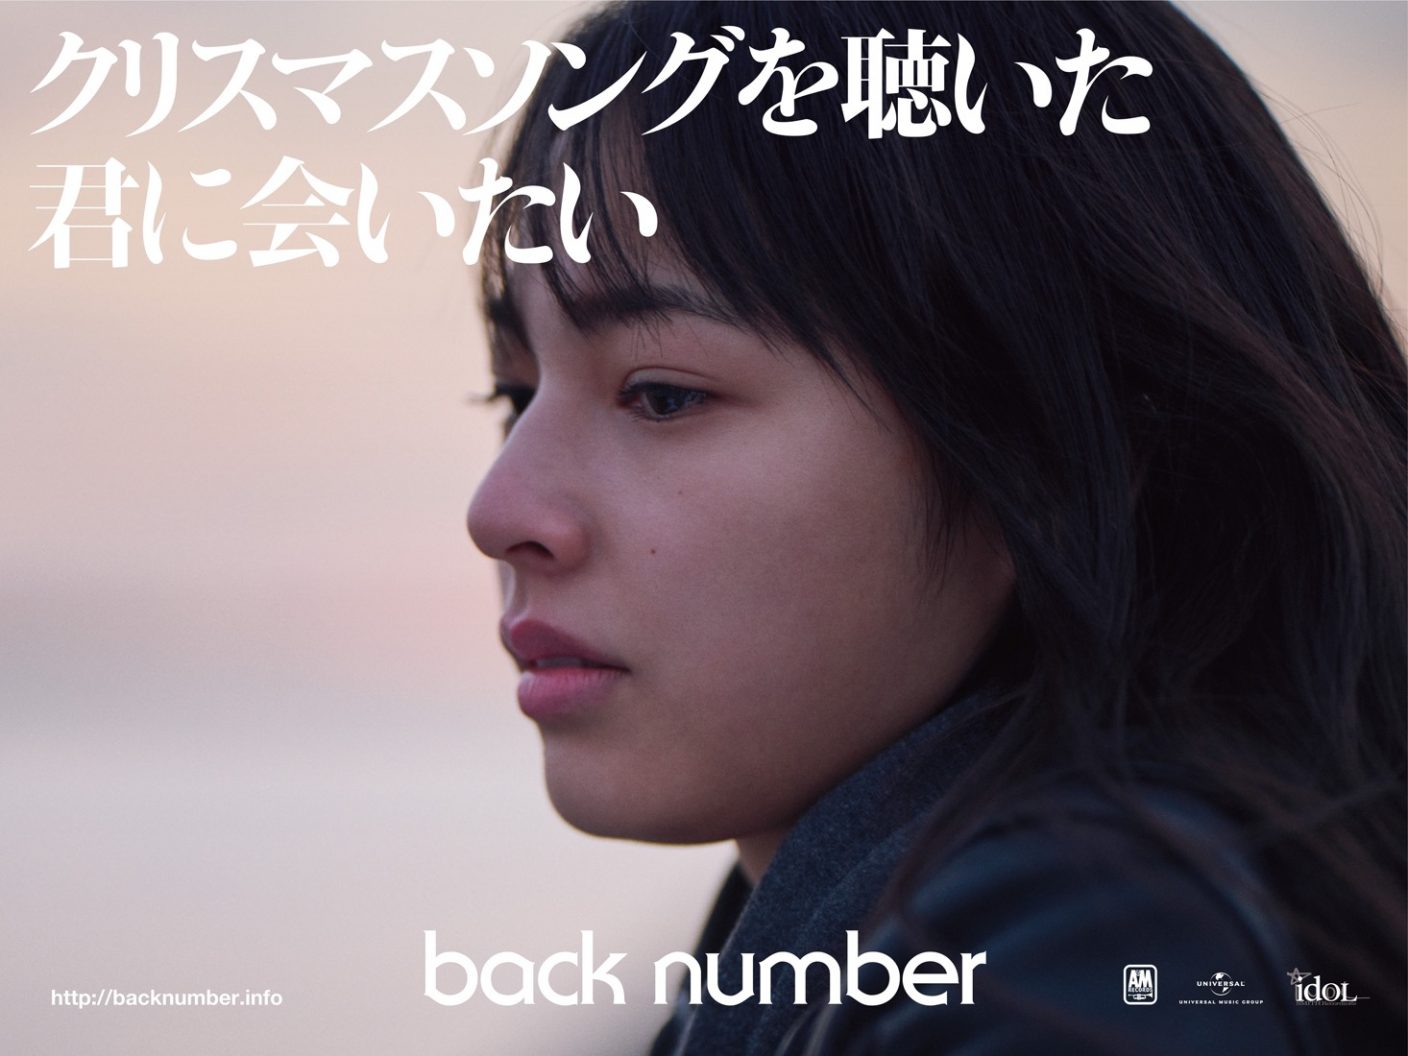 Back Number クリスマスソング のインスパイアビジュアルを都内11ヵ所の屋外ボードで掲出 The First Times